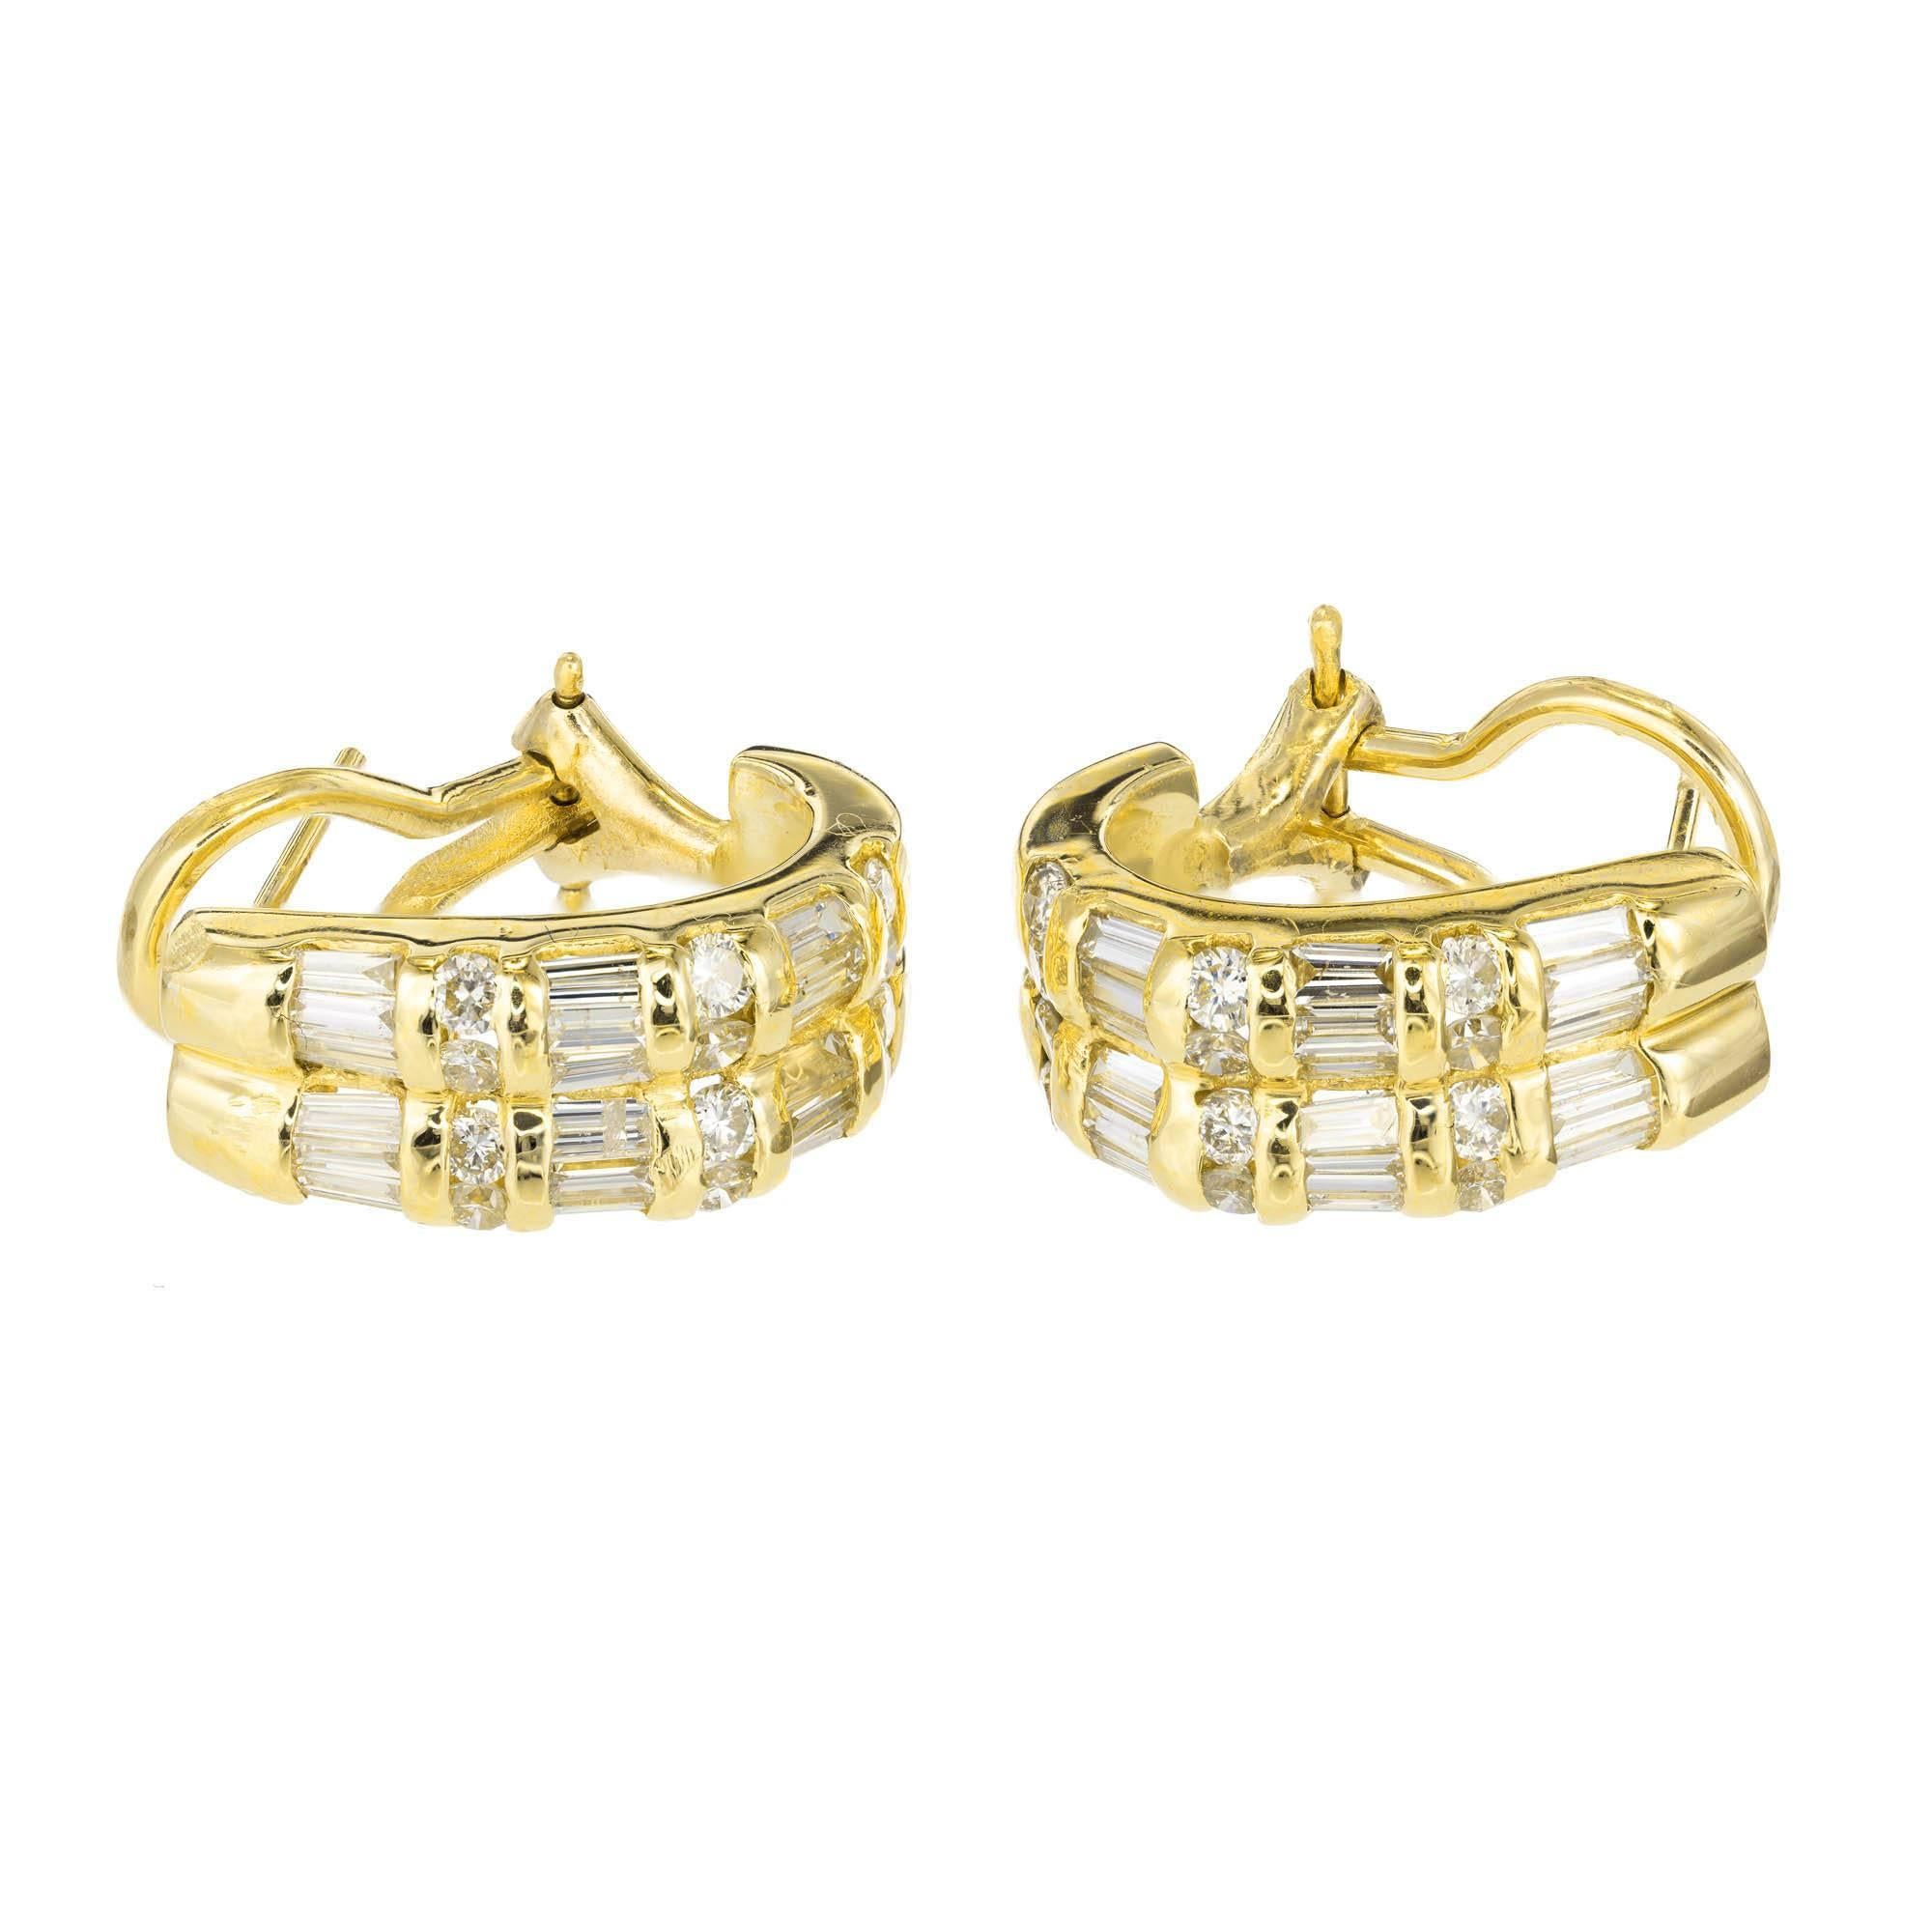 14k yellow gold diamond half hoop earrings. Earrings are set with six alternating rows of baguette cut and round brilliant cut diamonds which are all channel set. Earrings have a post with an omega clip back.

24 round G-H VS diamonds 1.8mm